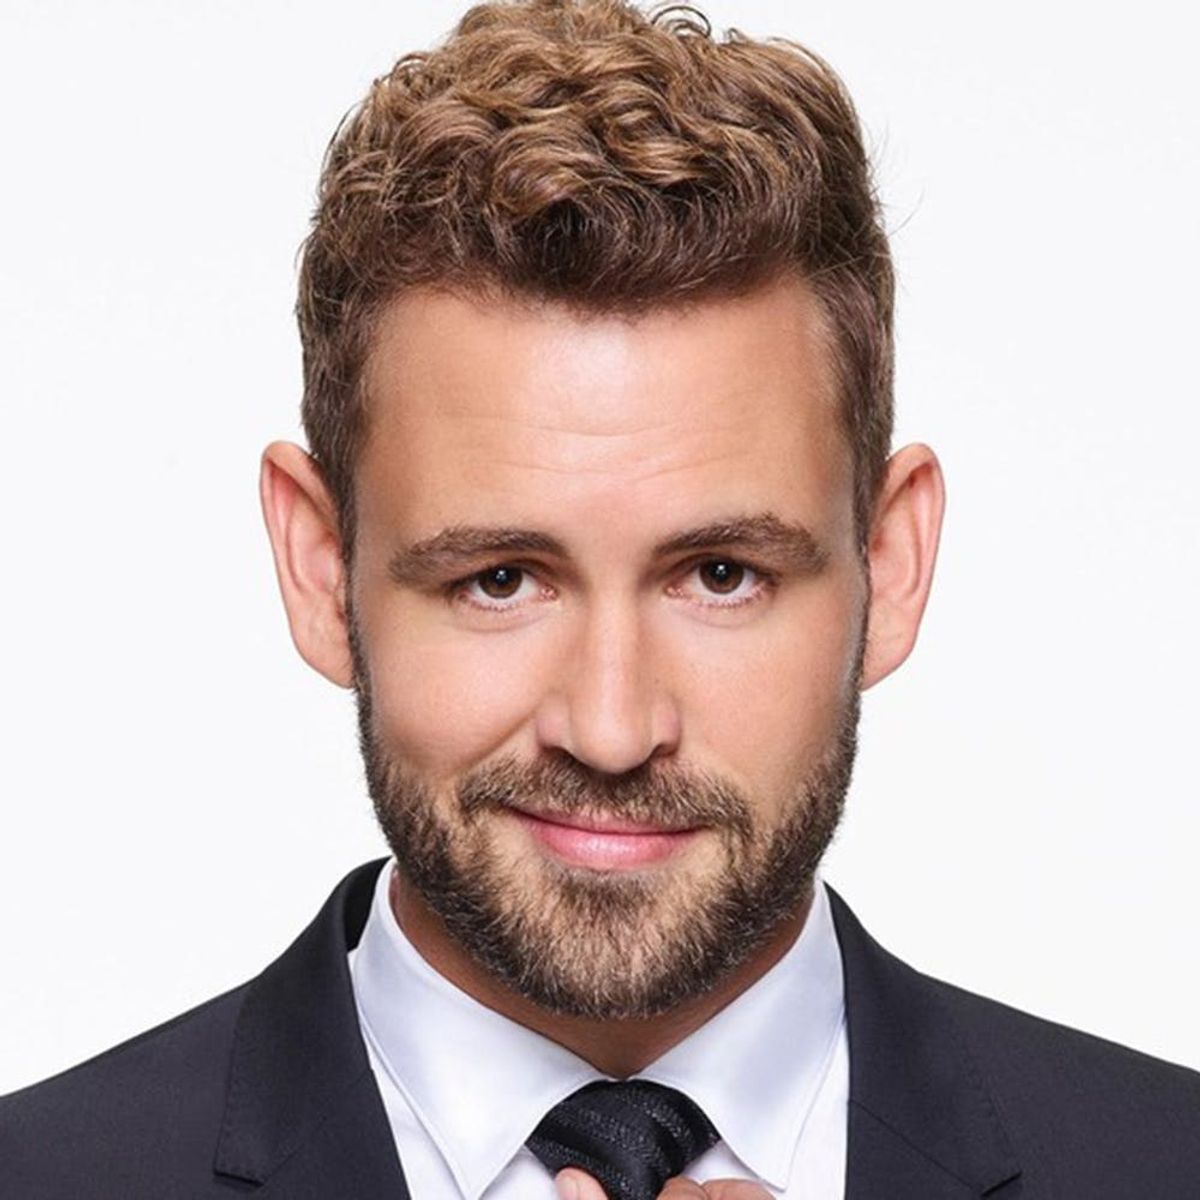 You’ll Soon Be Able to Catch Up on The Bachelor Via Snapchat